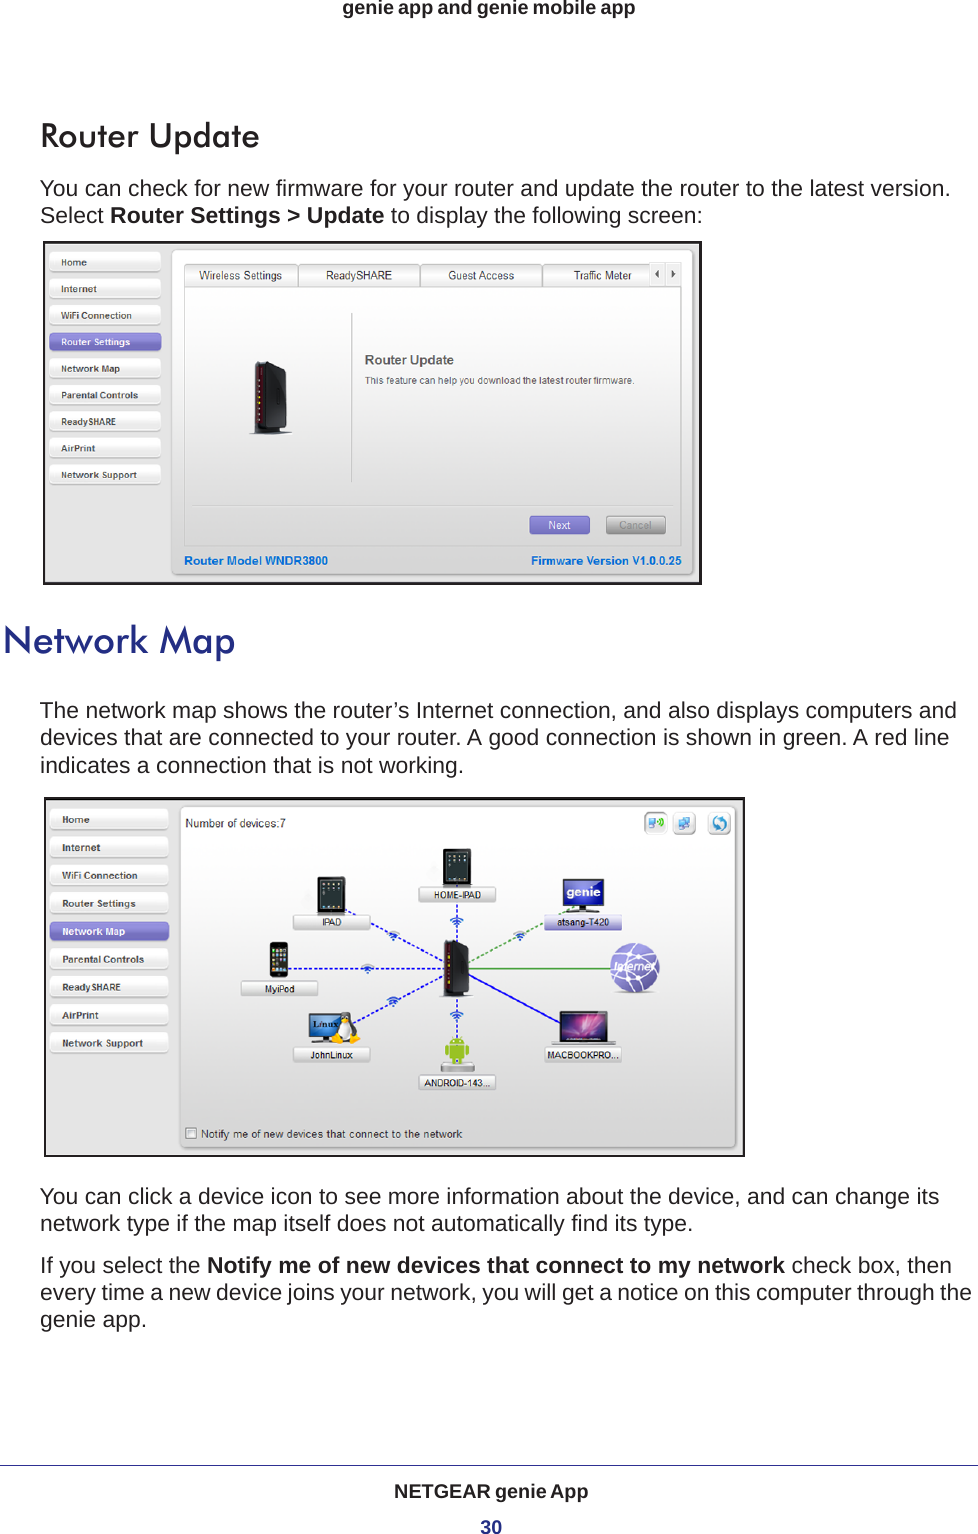 NETGEAR genie App30genie app and genie mobile app Router UpdateYou can check for new firmware for your router and update the router to the latest version. Select Router Settings &gt; Update to display the following screen:Network MapThe network map shows the router’s Internet connection, and also displays computers and devices that are connected to your router. A good connection is shown in green. A red line indicates a connection that is not working. You can click a device icon to see more information about the device, and can change its network type if the map itself does not automatically find its type.If you select the Notify me of new devices that connect to my network check box, then every time a new device joins your network, you will get a notice on this computer through the genie app. 